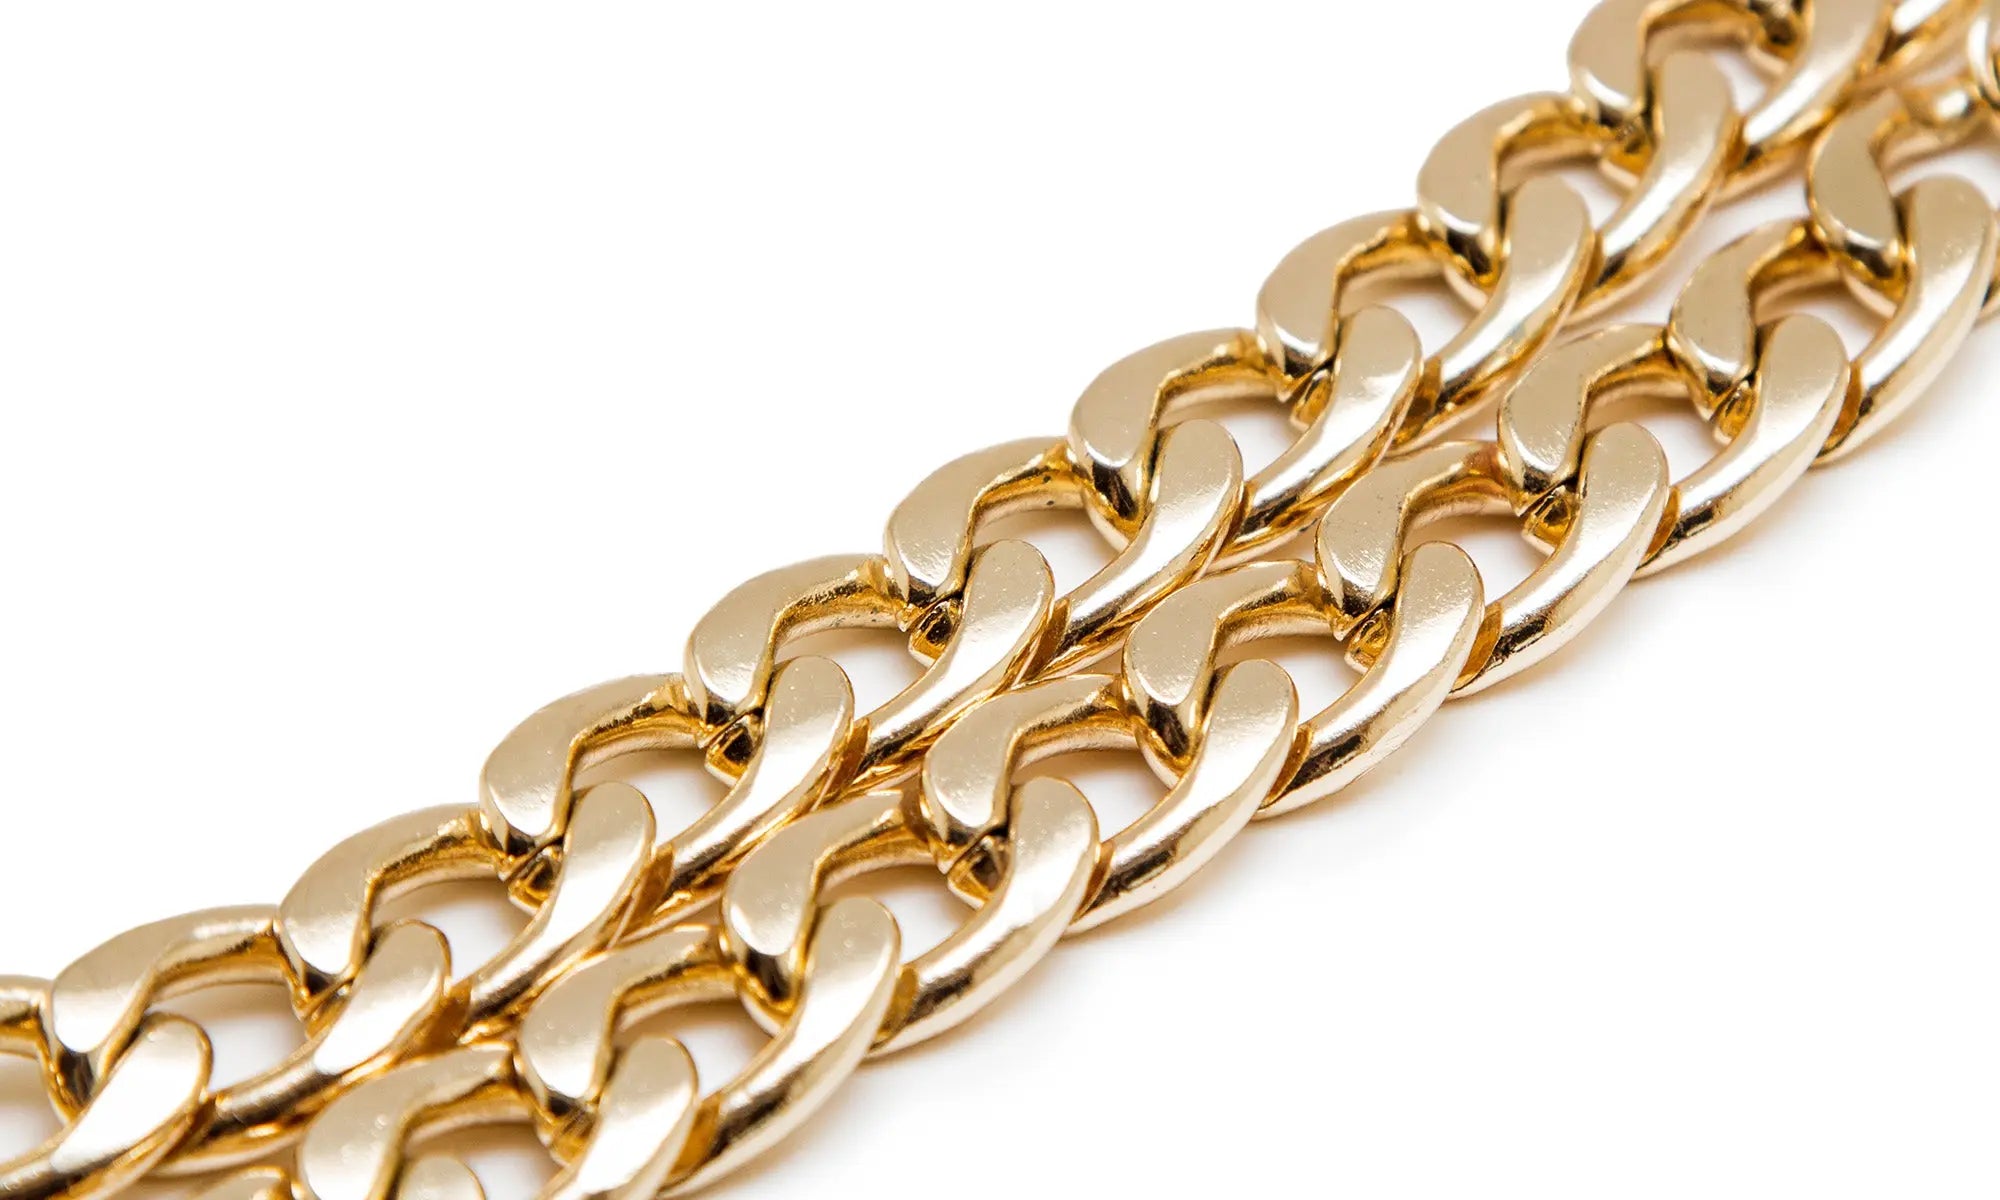 How much is a Real Gold Chain?